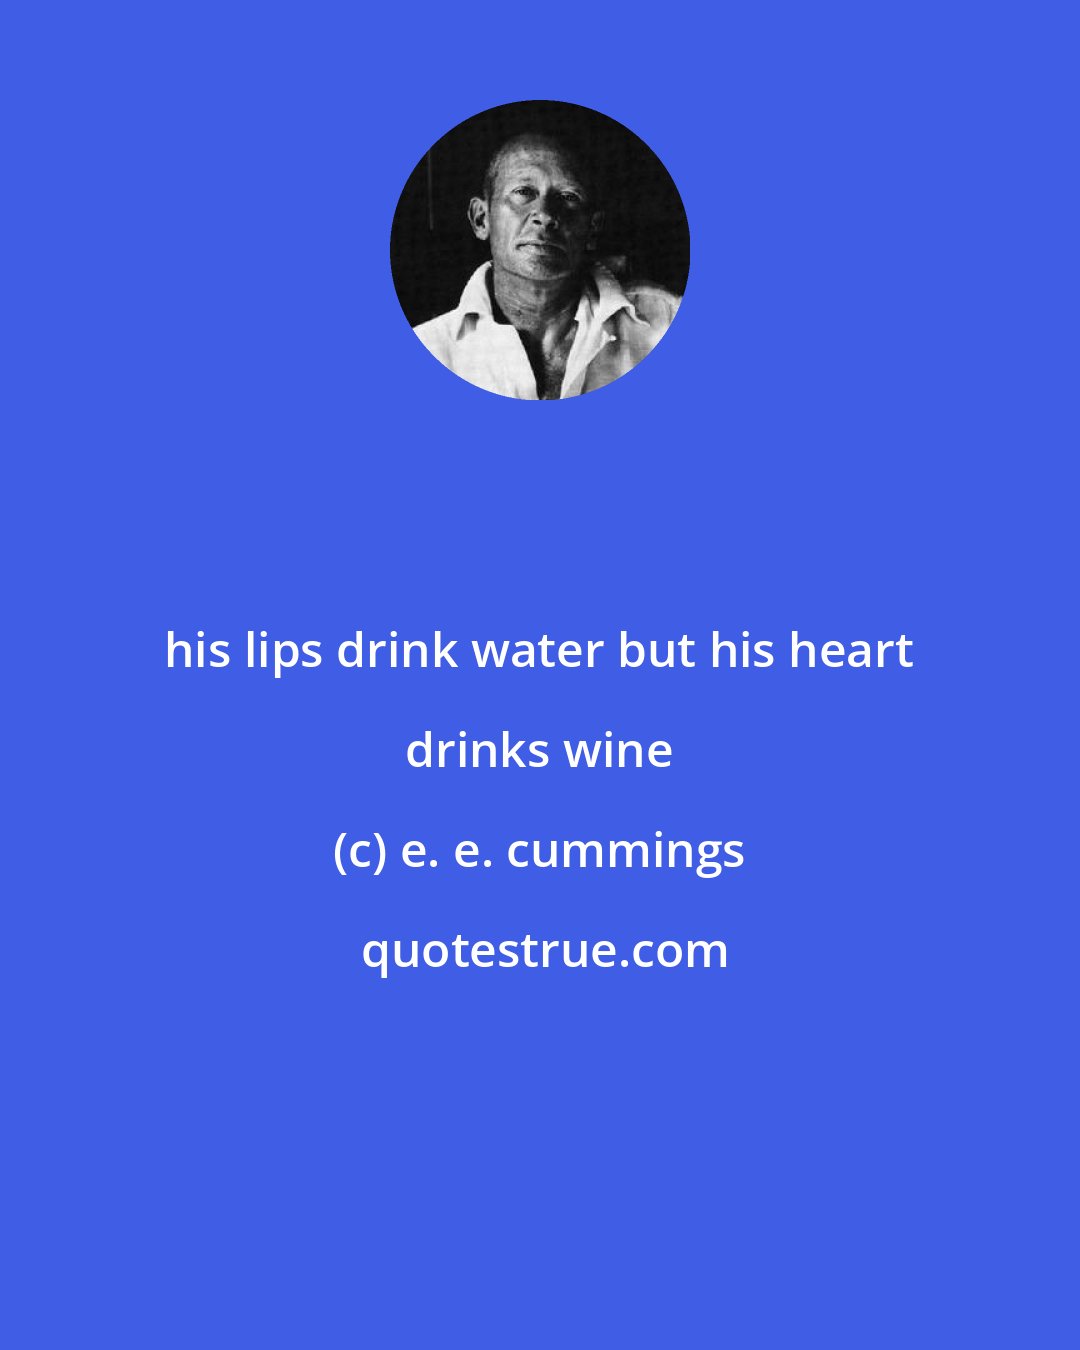 e. e. cummings: his lips drink water but his heart drinks wine